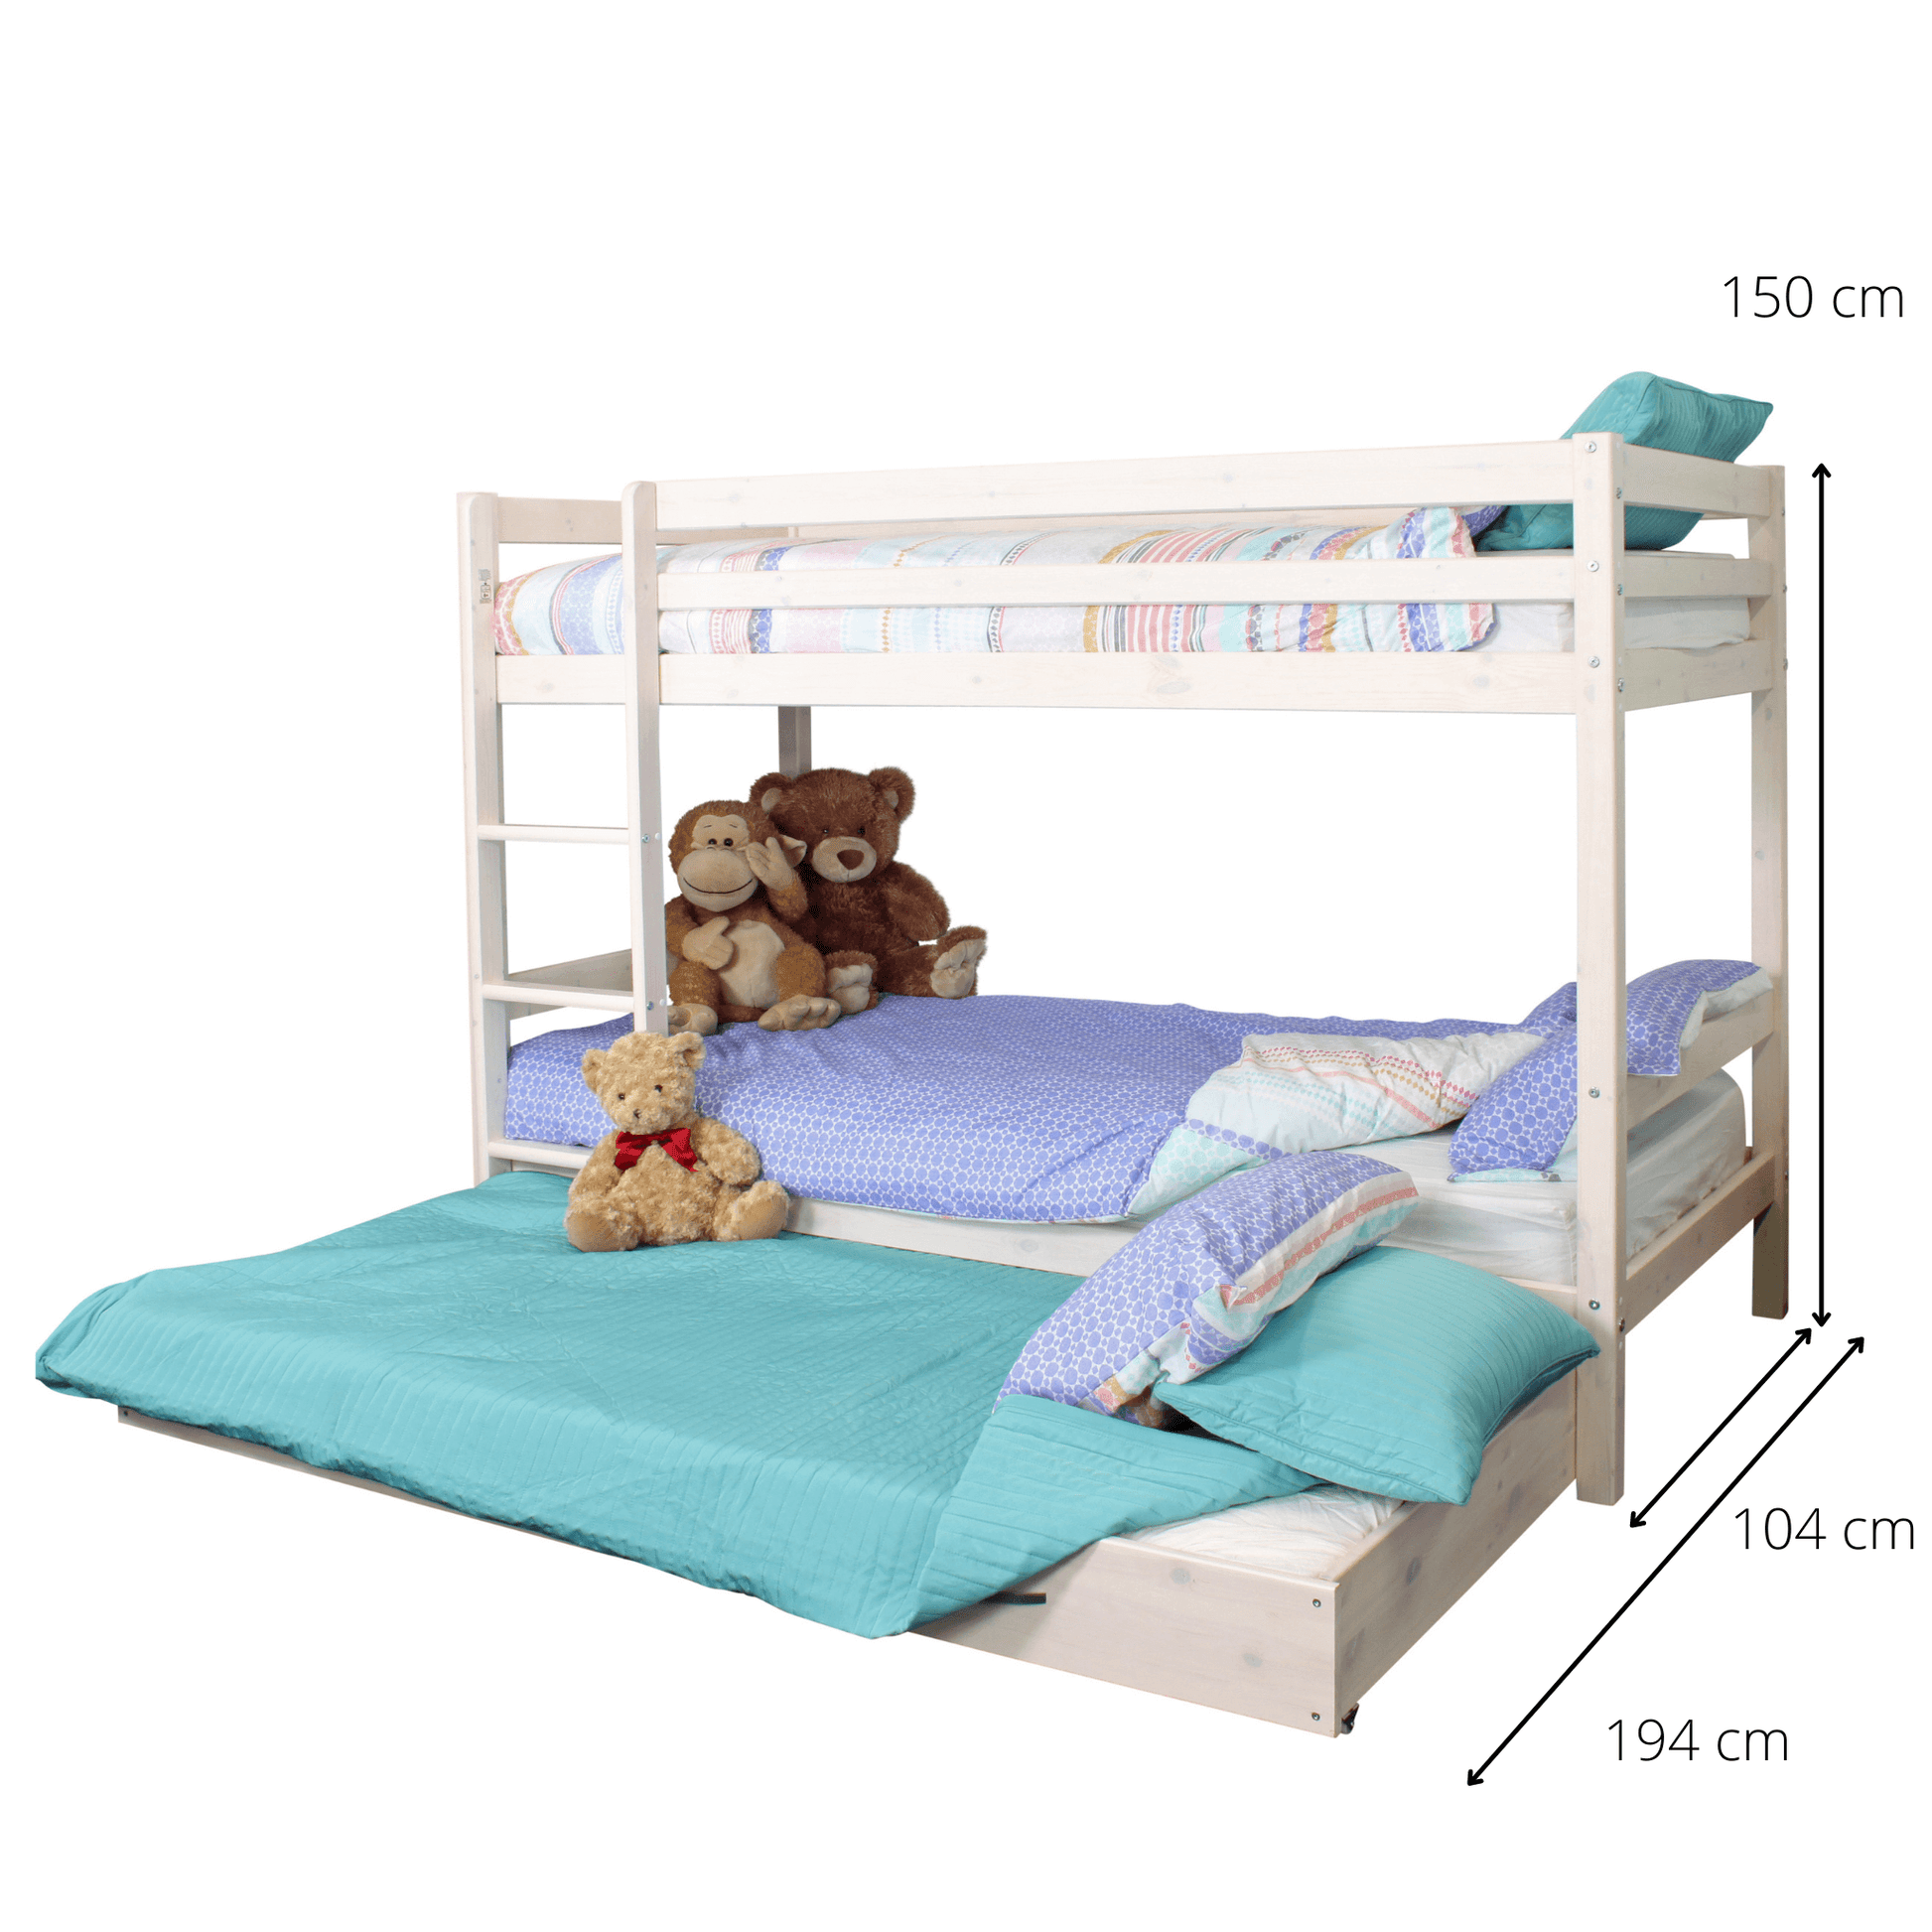 thuka hit 5 bunk bed t& trundle dimensions